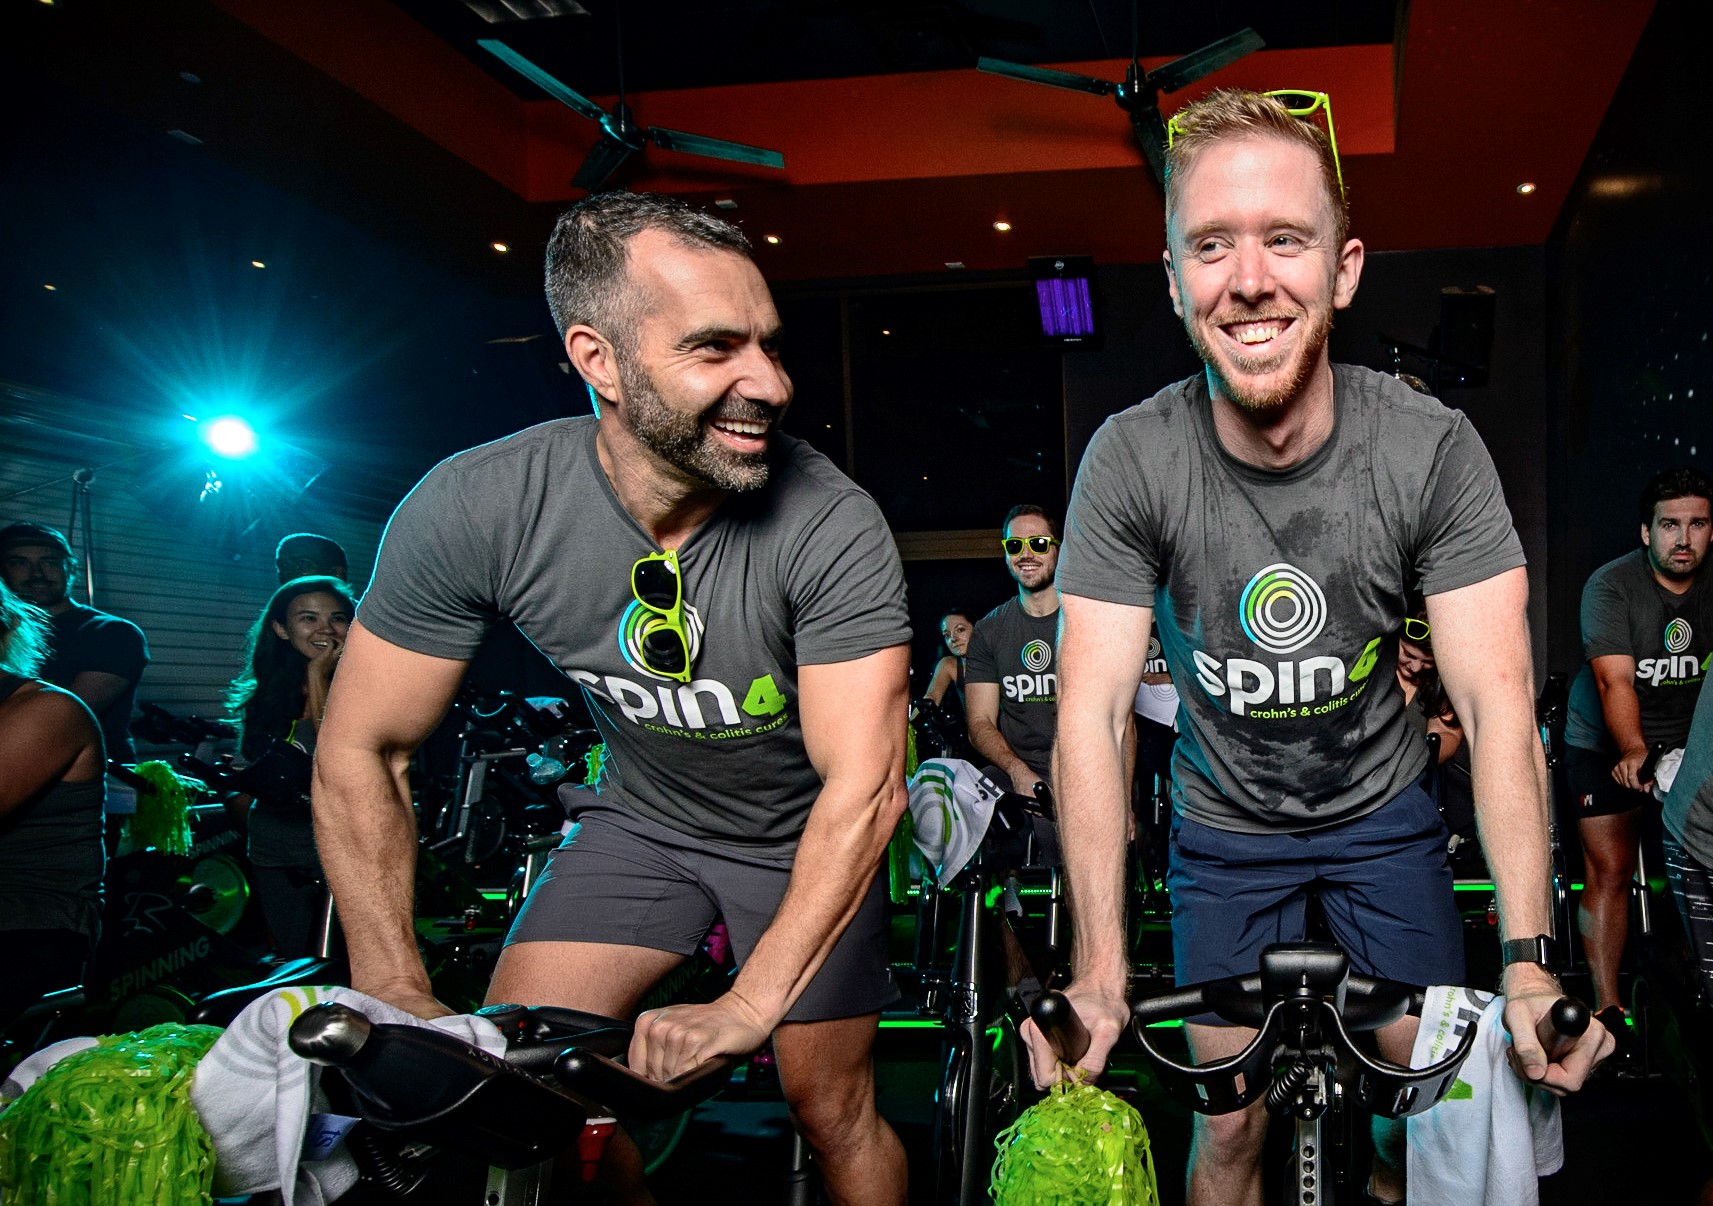 spin4 crohn’s & colitis cures in 2017